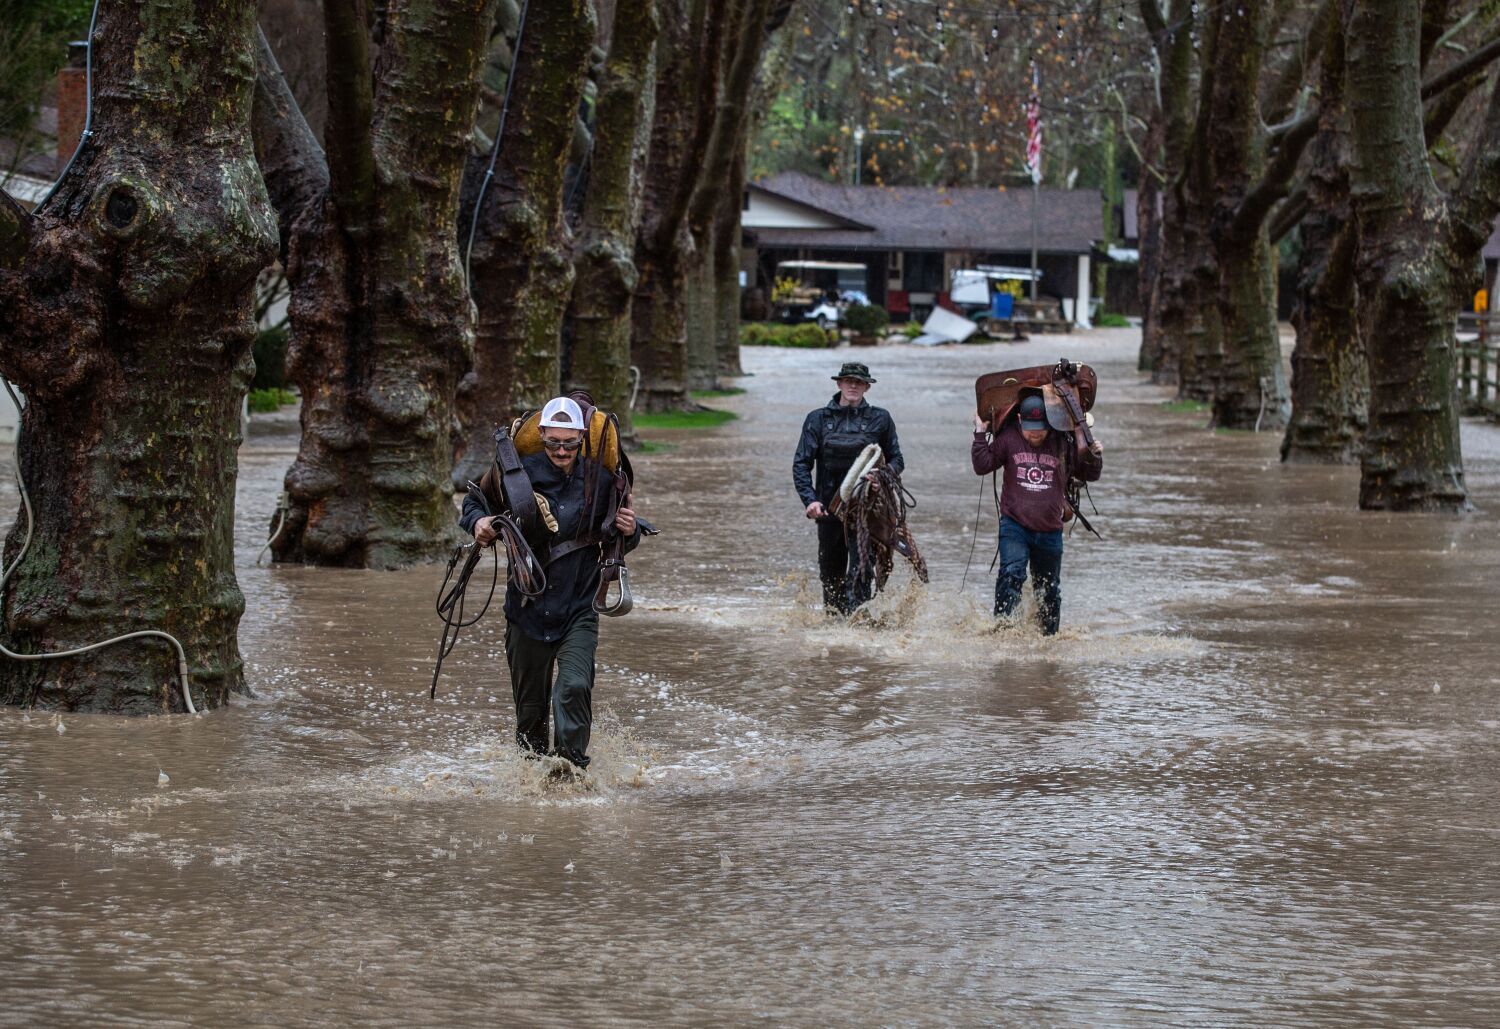 California storm death toll reaches 16 as more rain, winds hit state